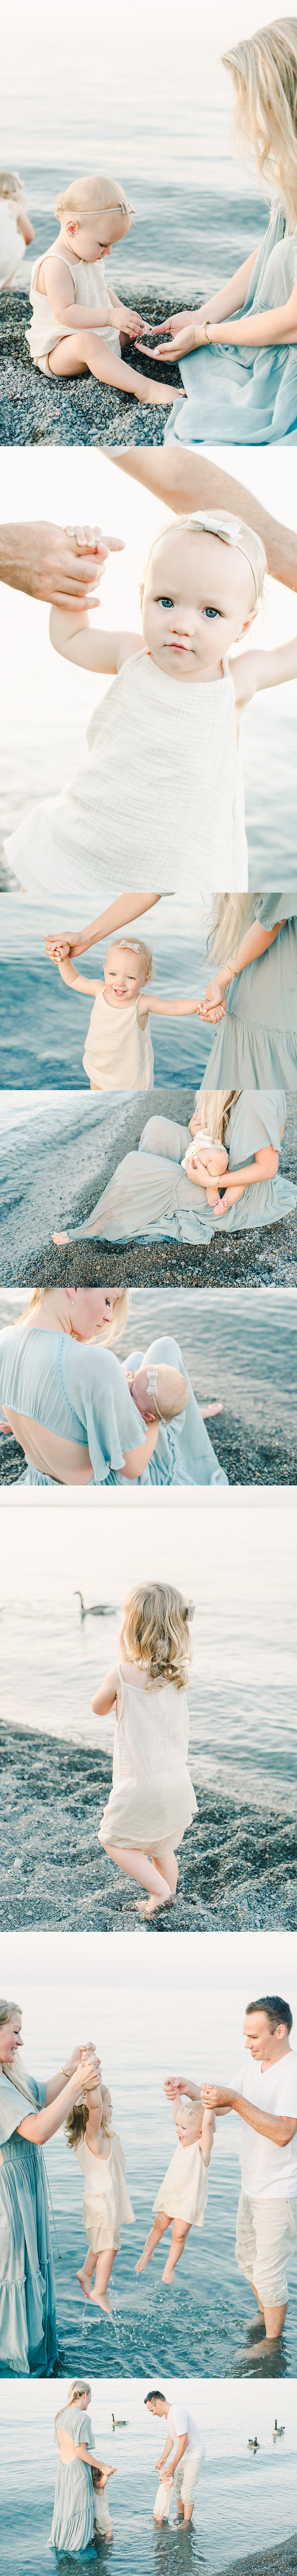 beach family session in ontario